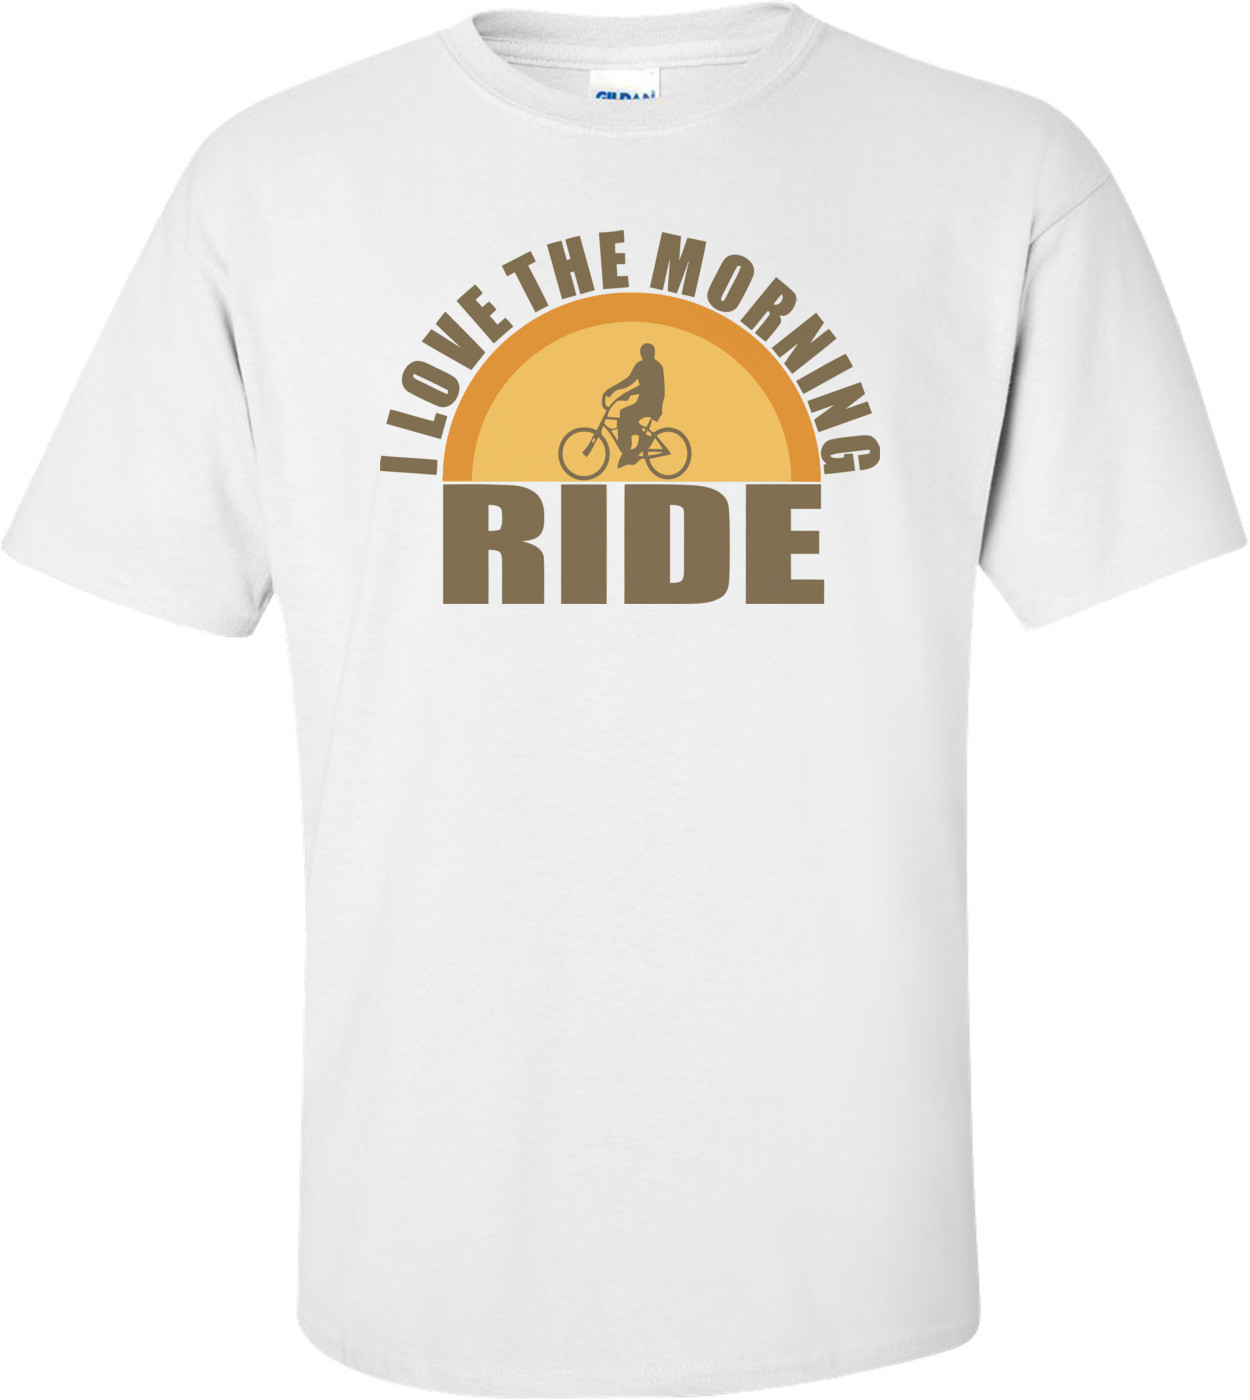 I Love The Morning Ride T-shirt